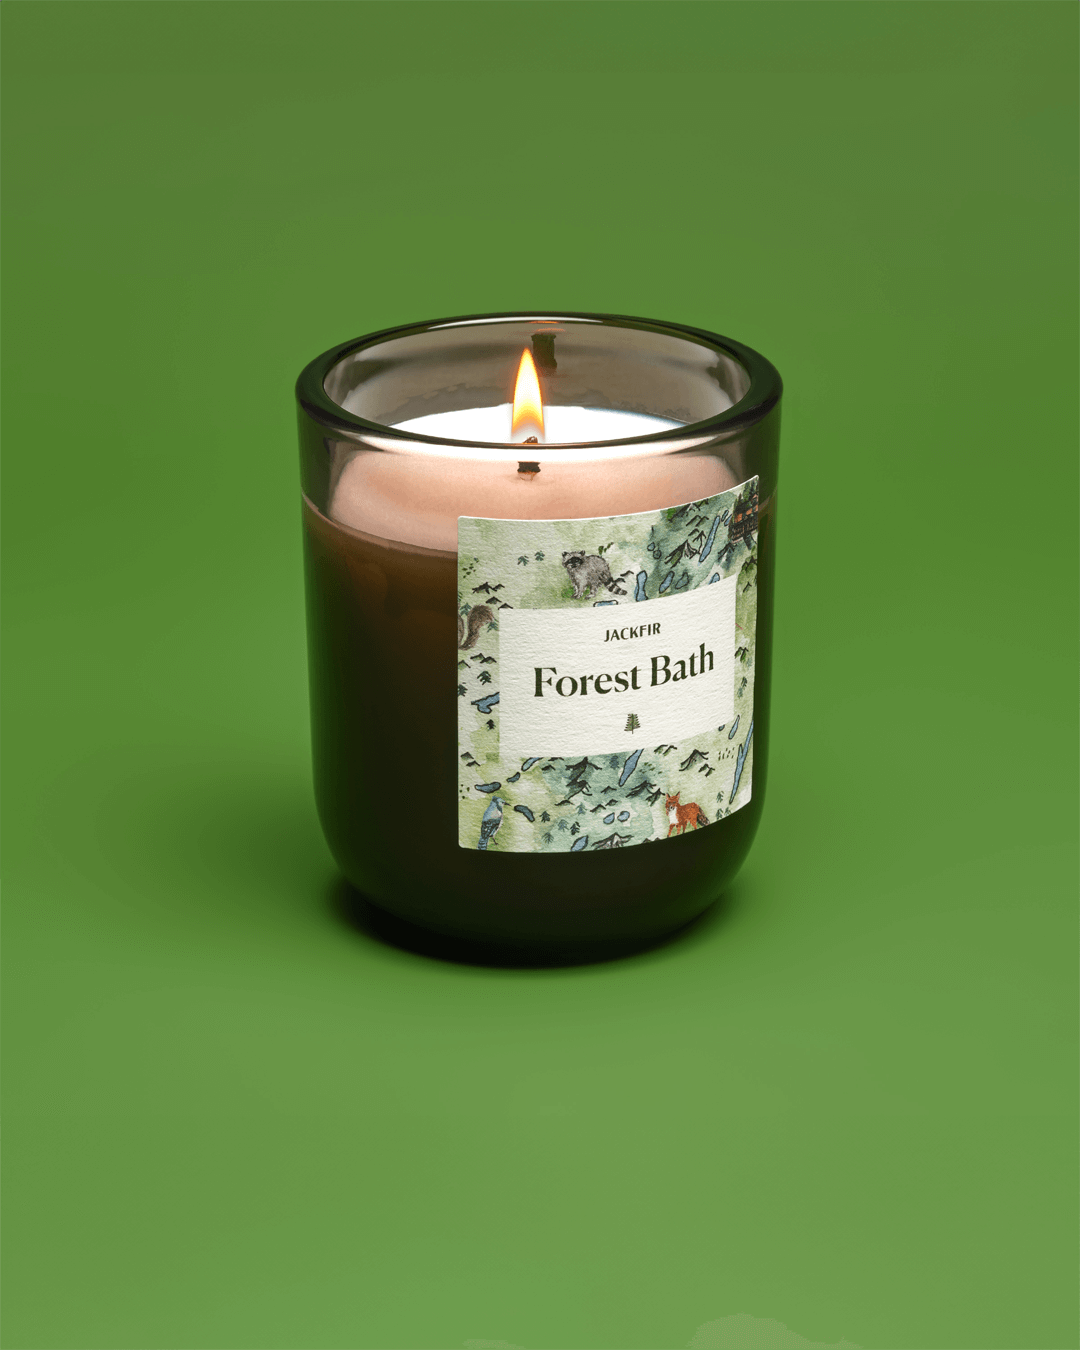 The Forest Bath Candle